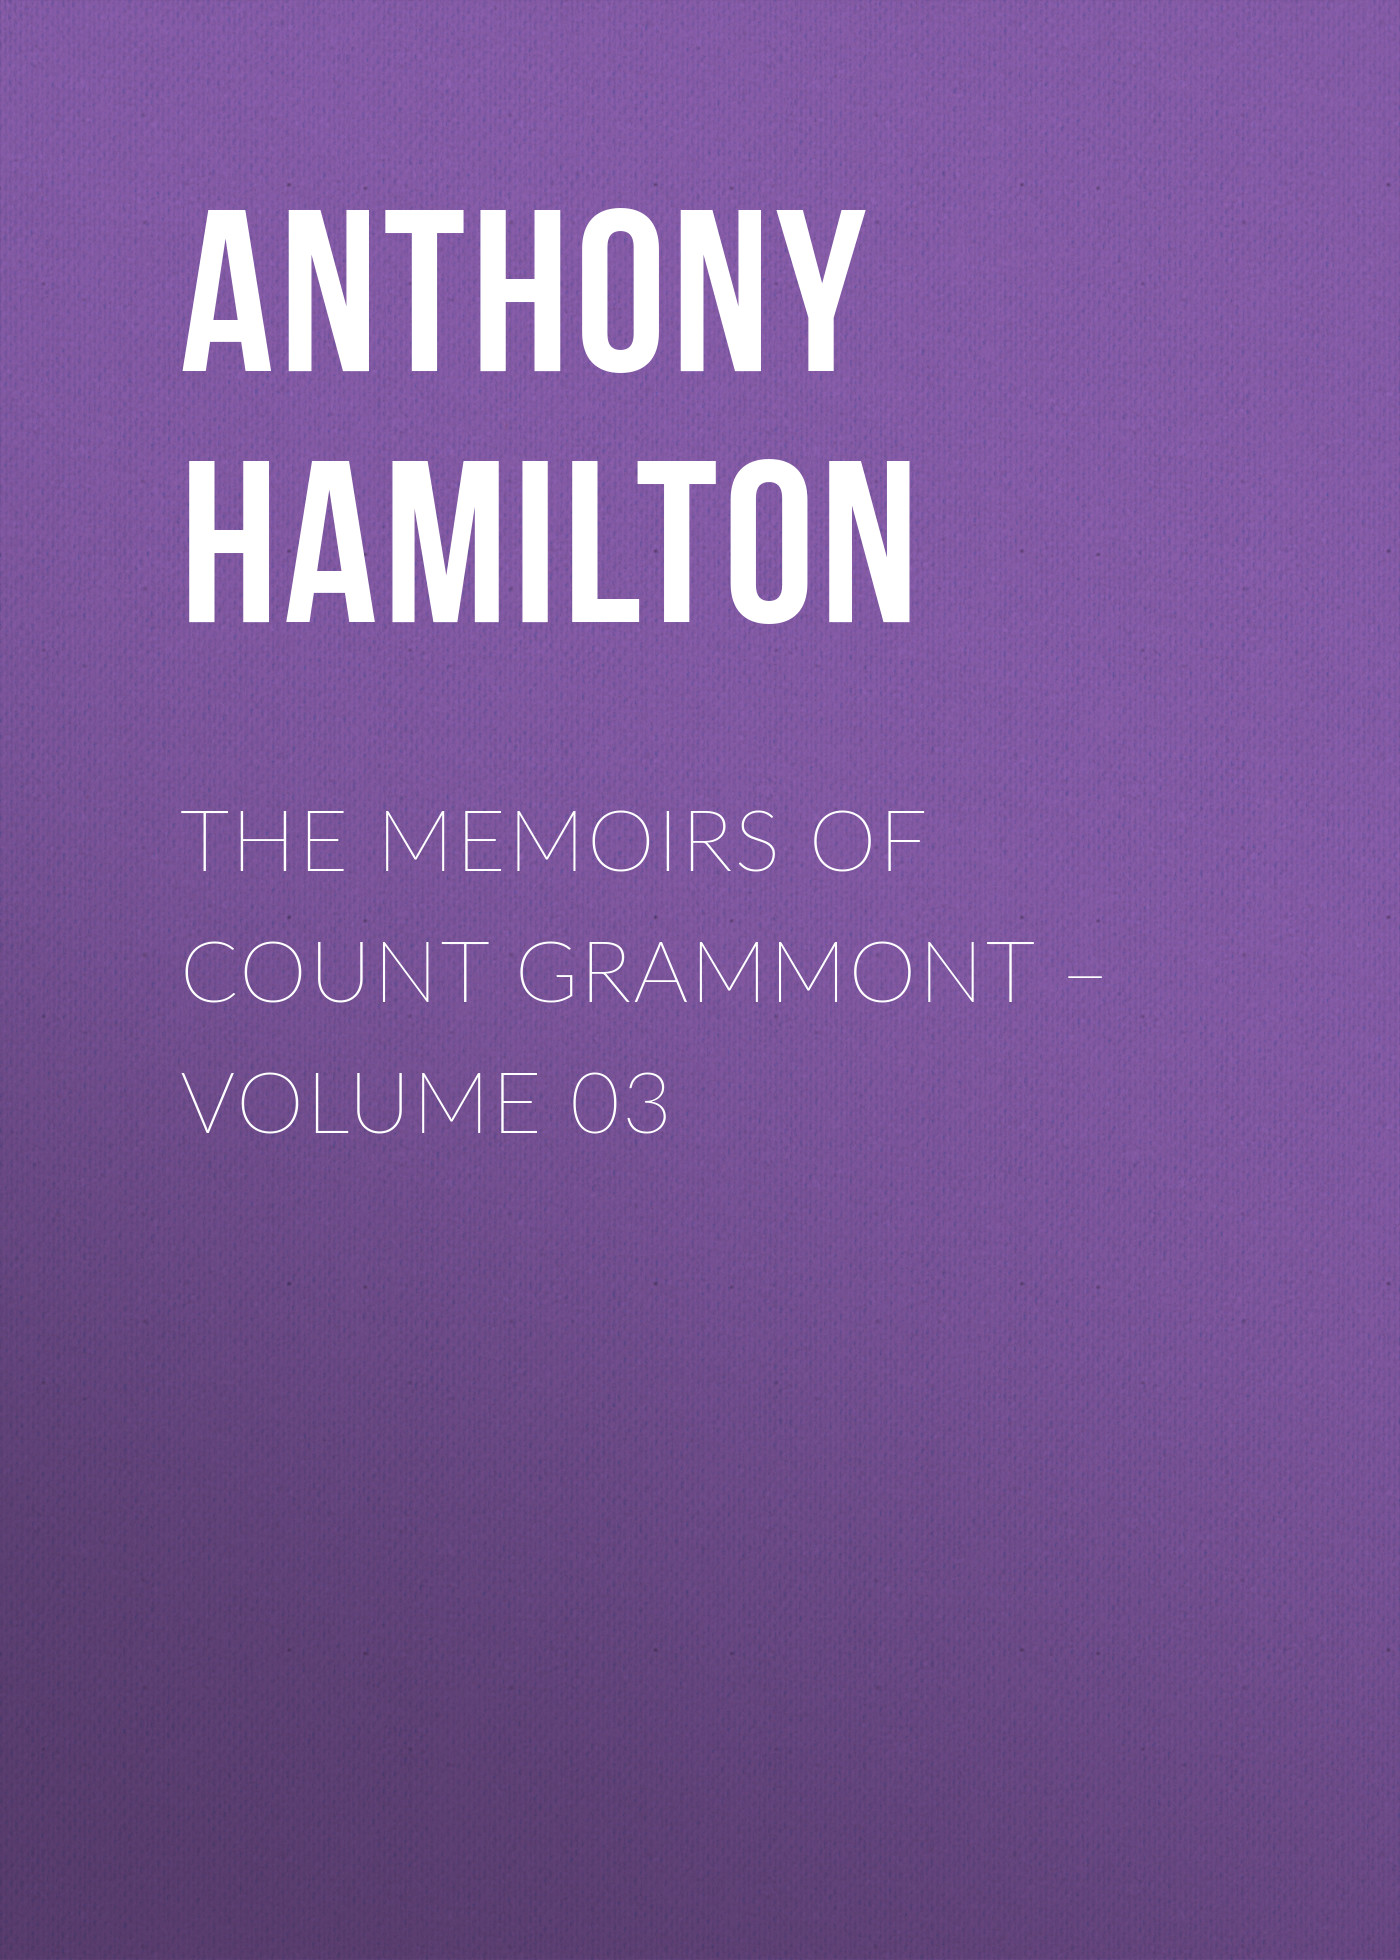 The Memoirs of Count Grammont– Volume 03